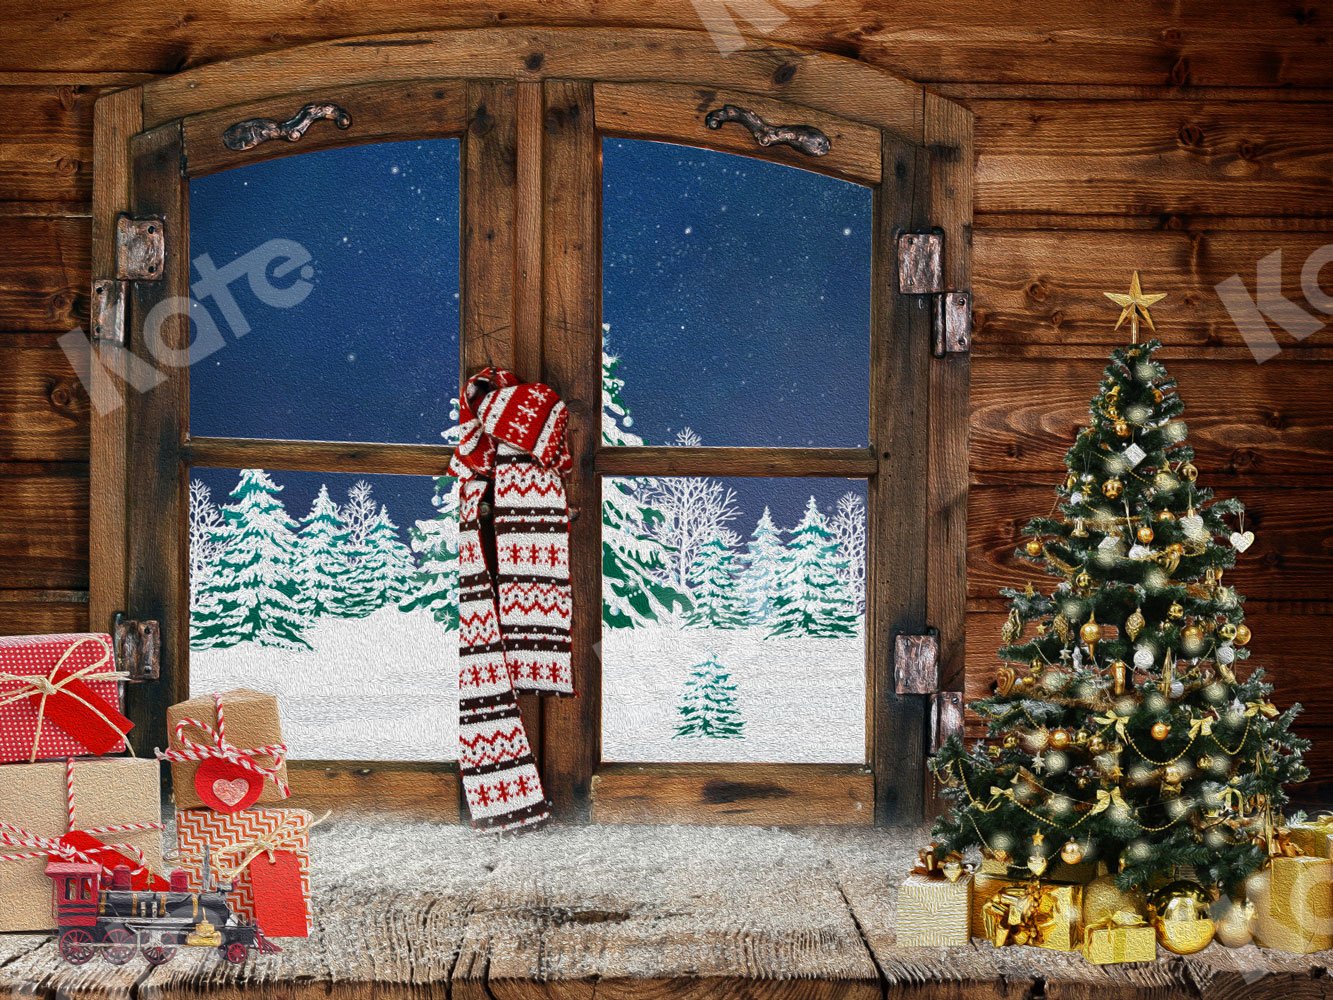 Kate Xmas Backdrop Window Christmas Tree Gifts Designed By JFCC